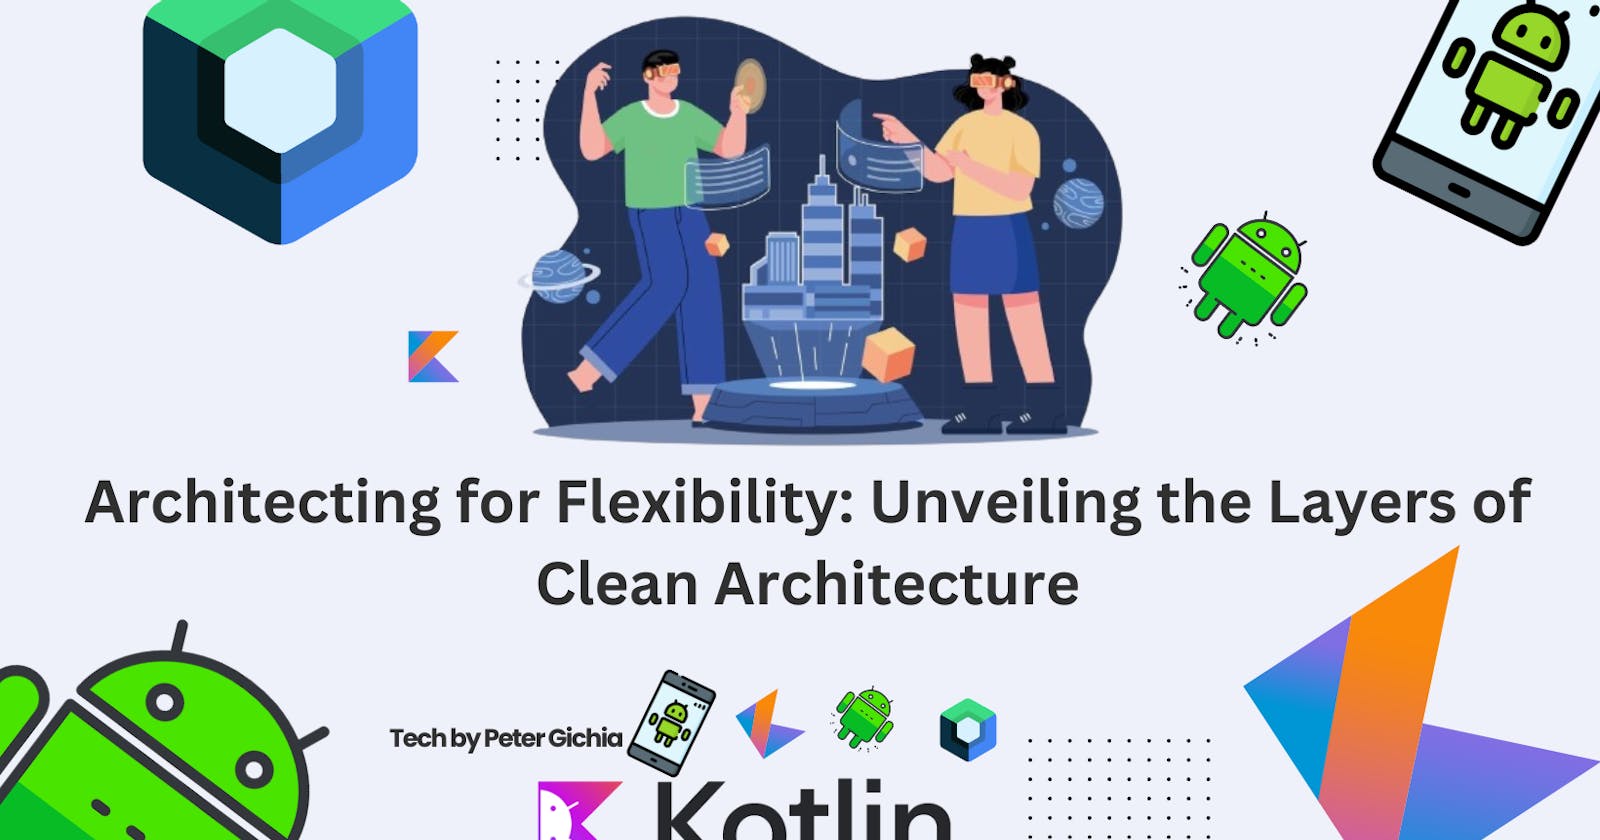 Architecting for Flexibility: Unveiling the Layers of Clean Architecture - Part 2